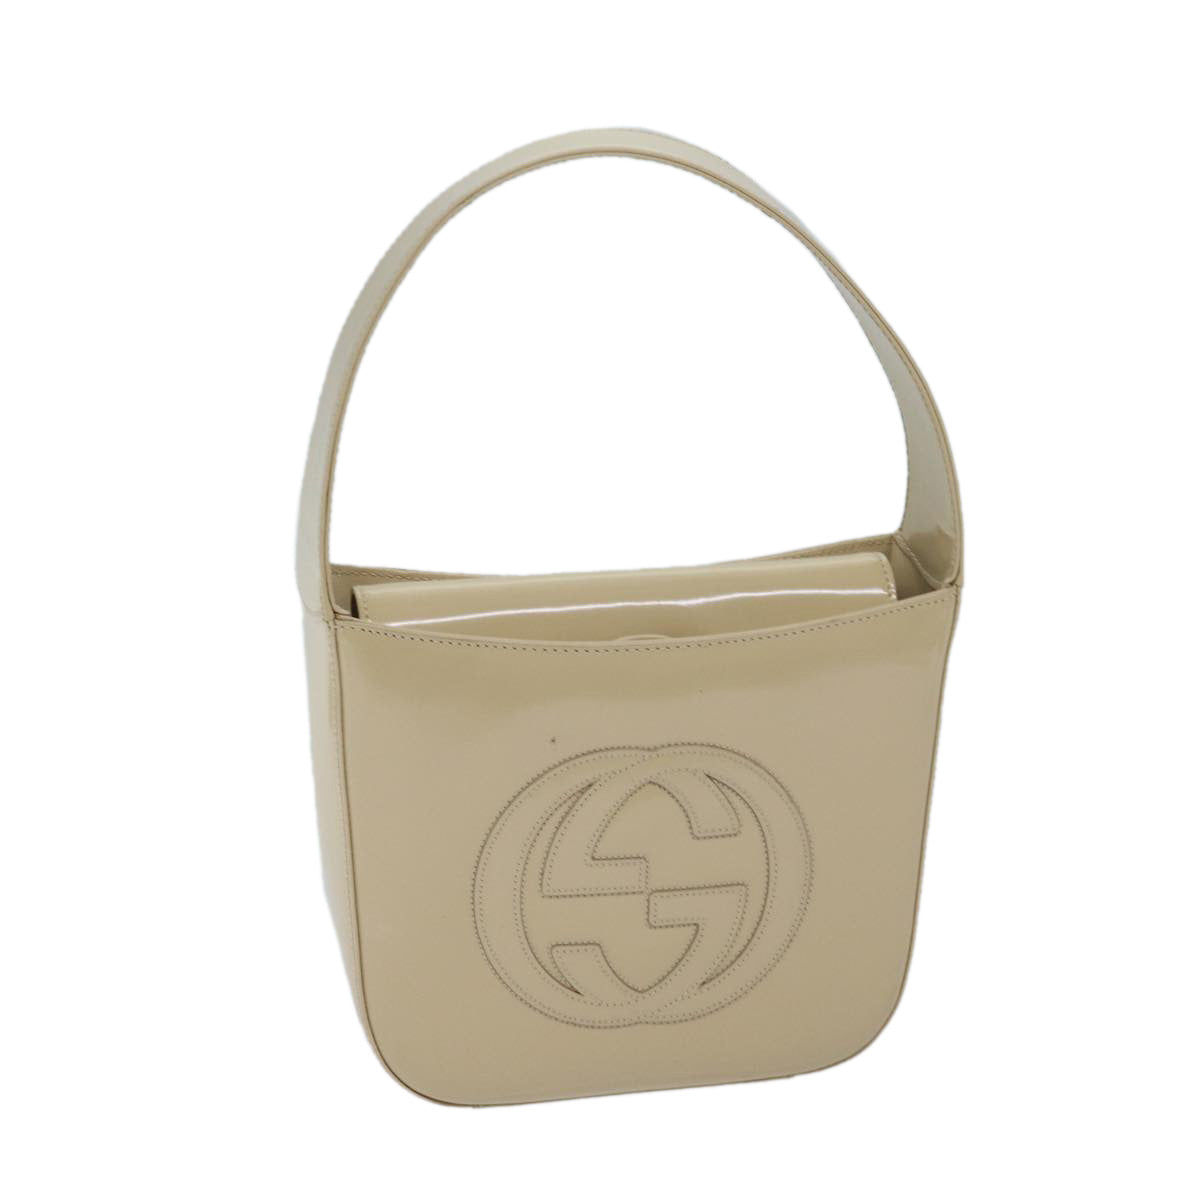 GUCCI Hand Bag Patent leather Beige 007 2046 0249 Auth ep3712